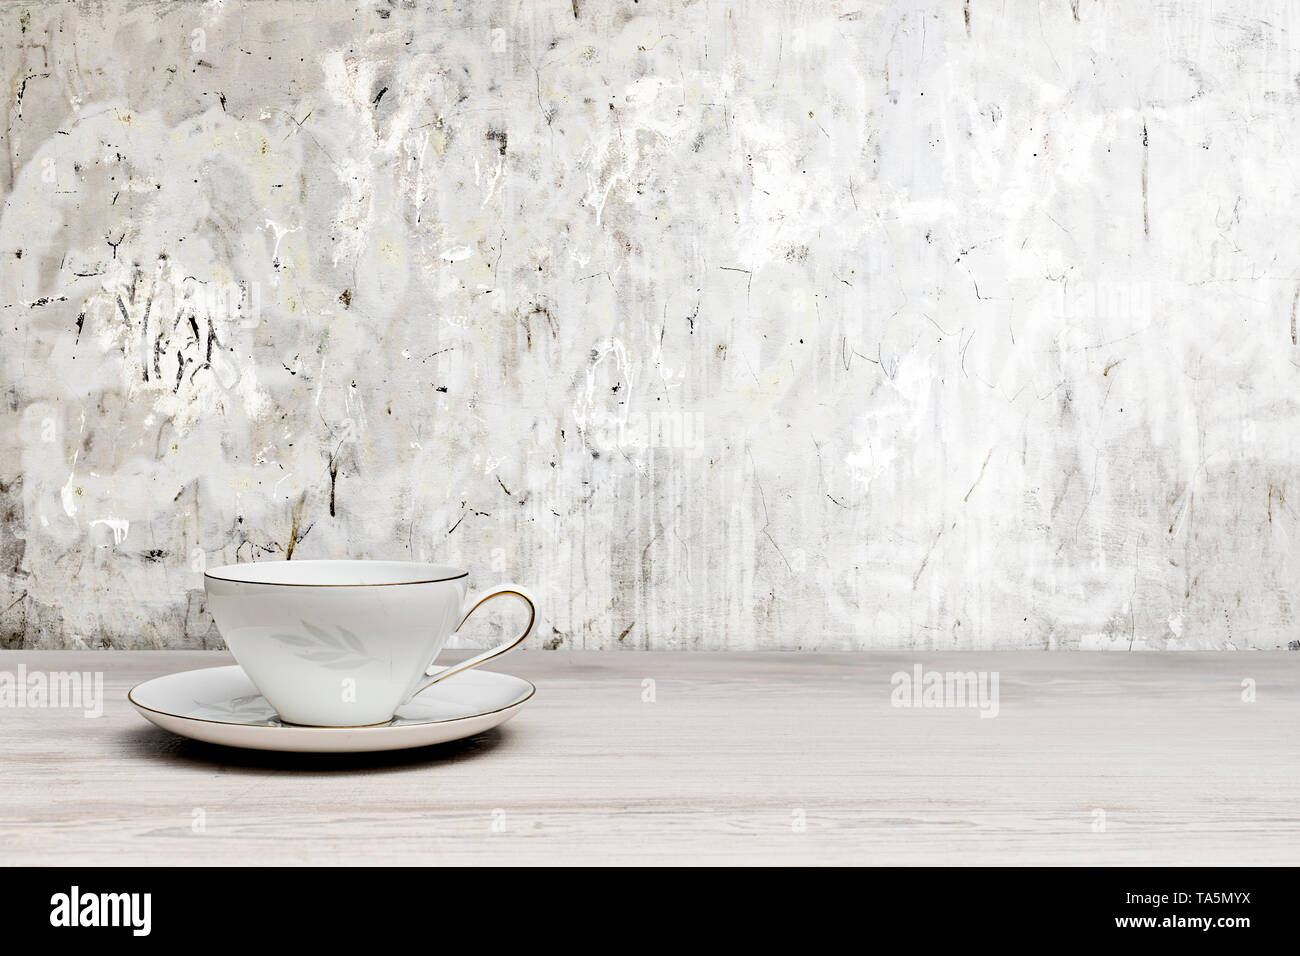 Vintage teacup on a white wooden table, textured wall Stock Photo